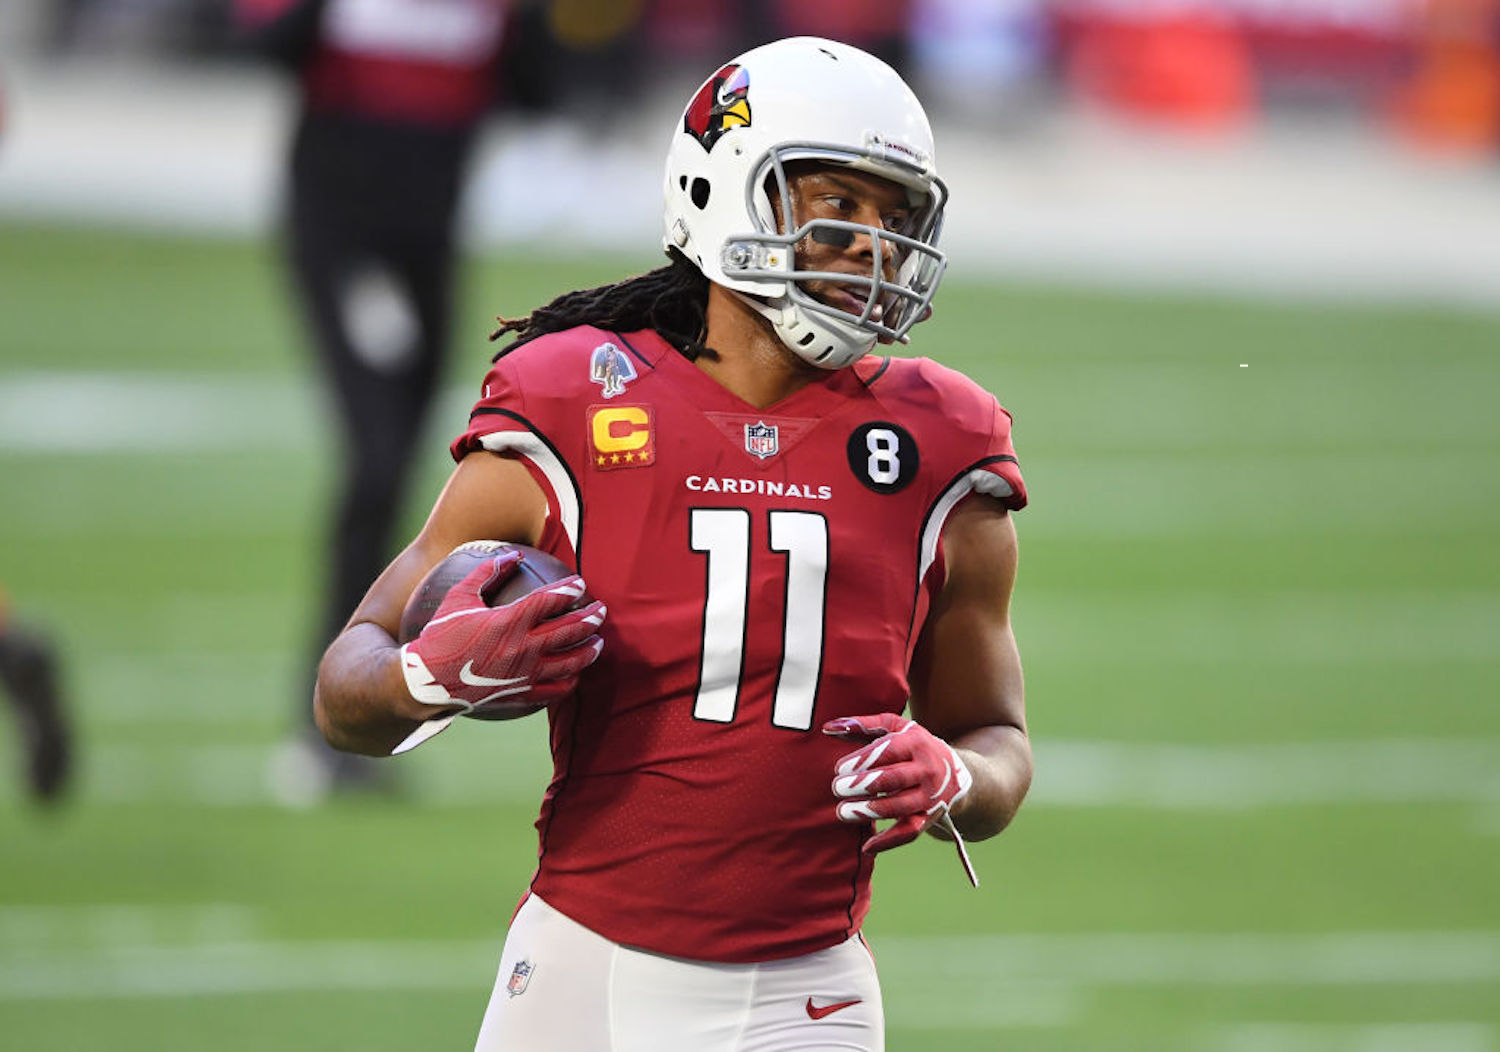 The Arizona Cardinals will be without future Hall-of-Fame wide receiver Larry Fitzgerald Sunday against the Los Angeles Rams.